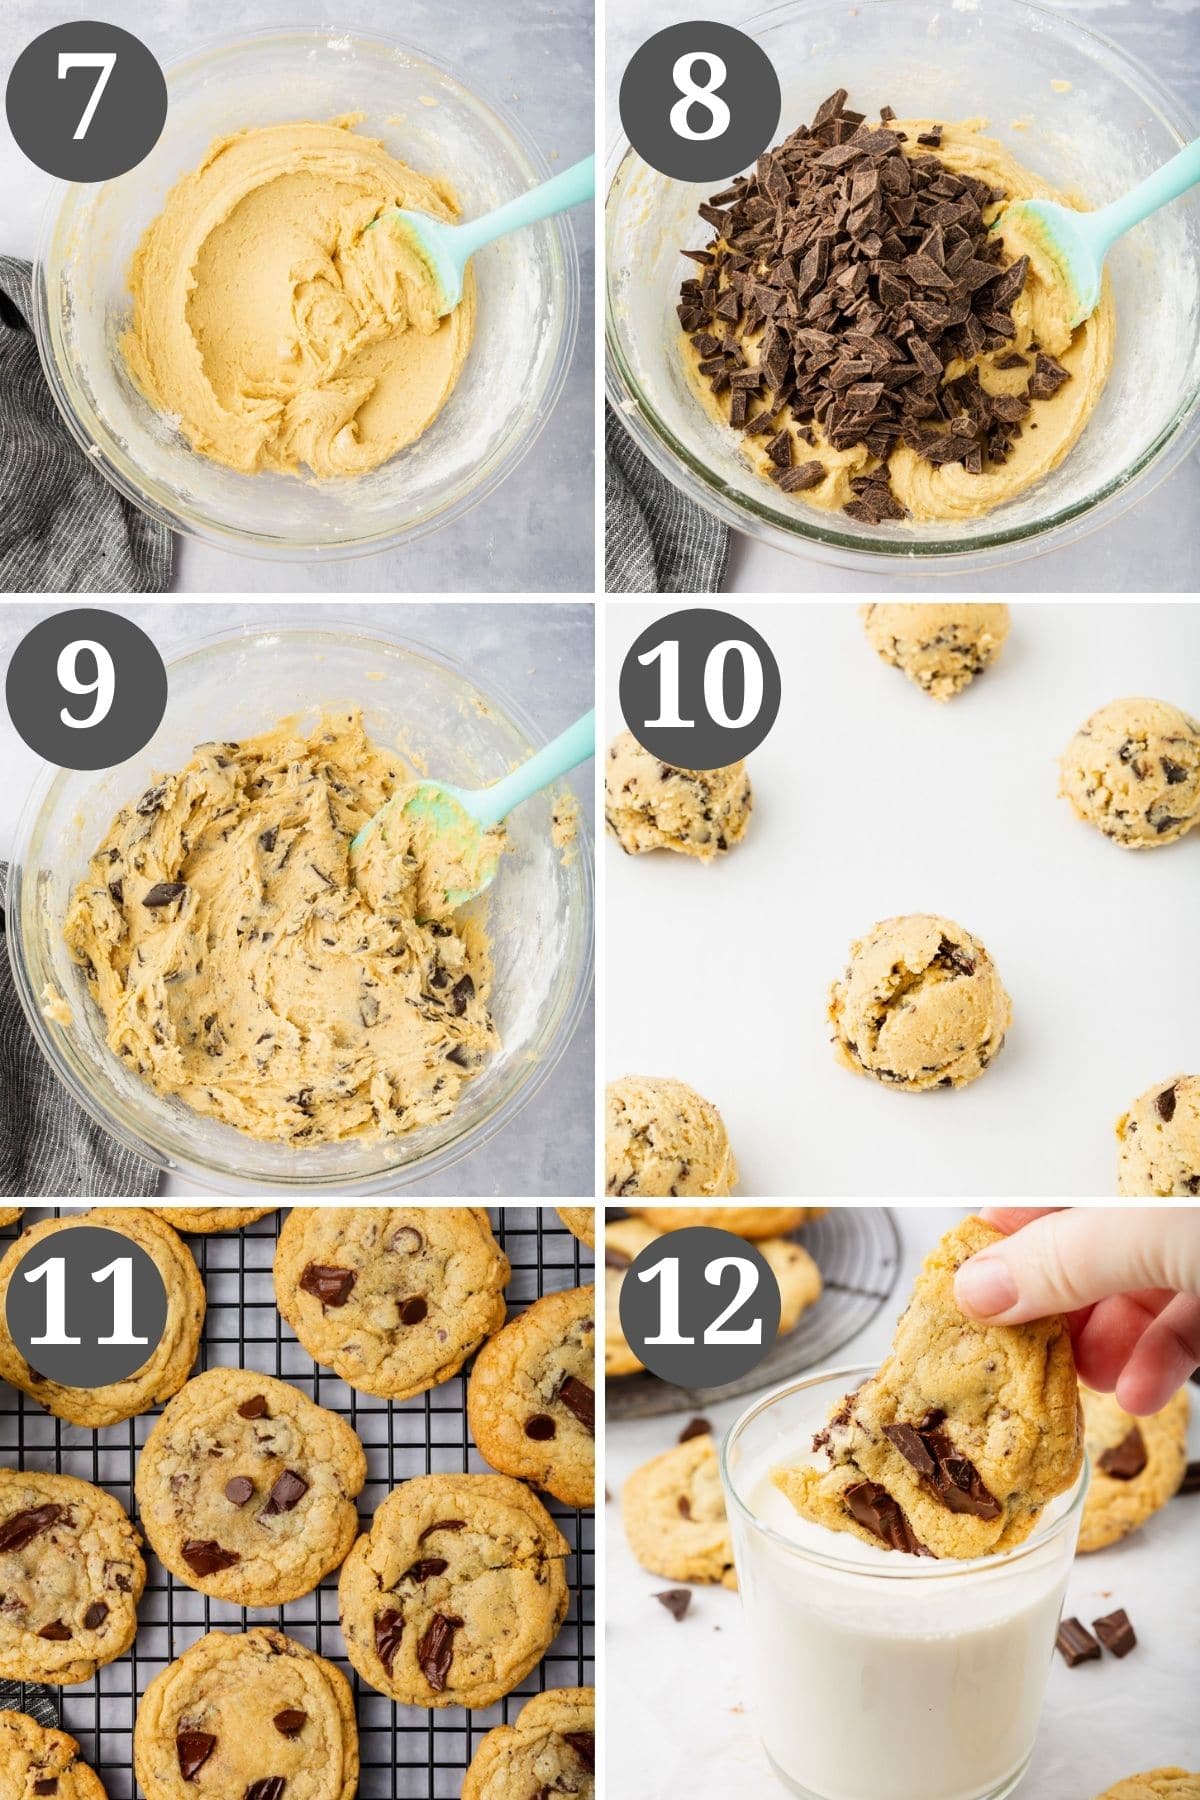 Steps 7-12 for making gluten-free chocolate chip cookies.